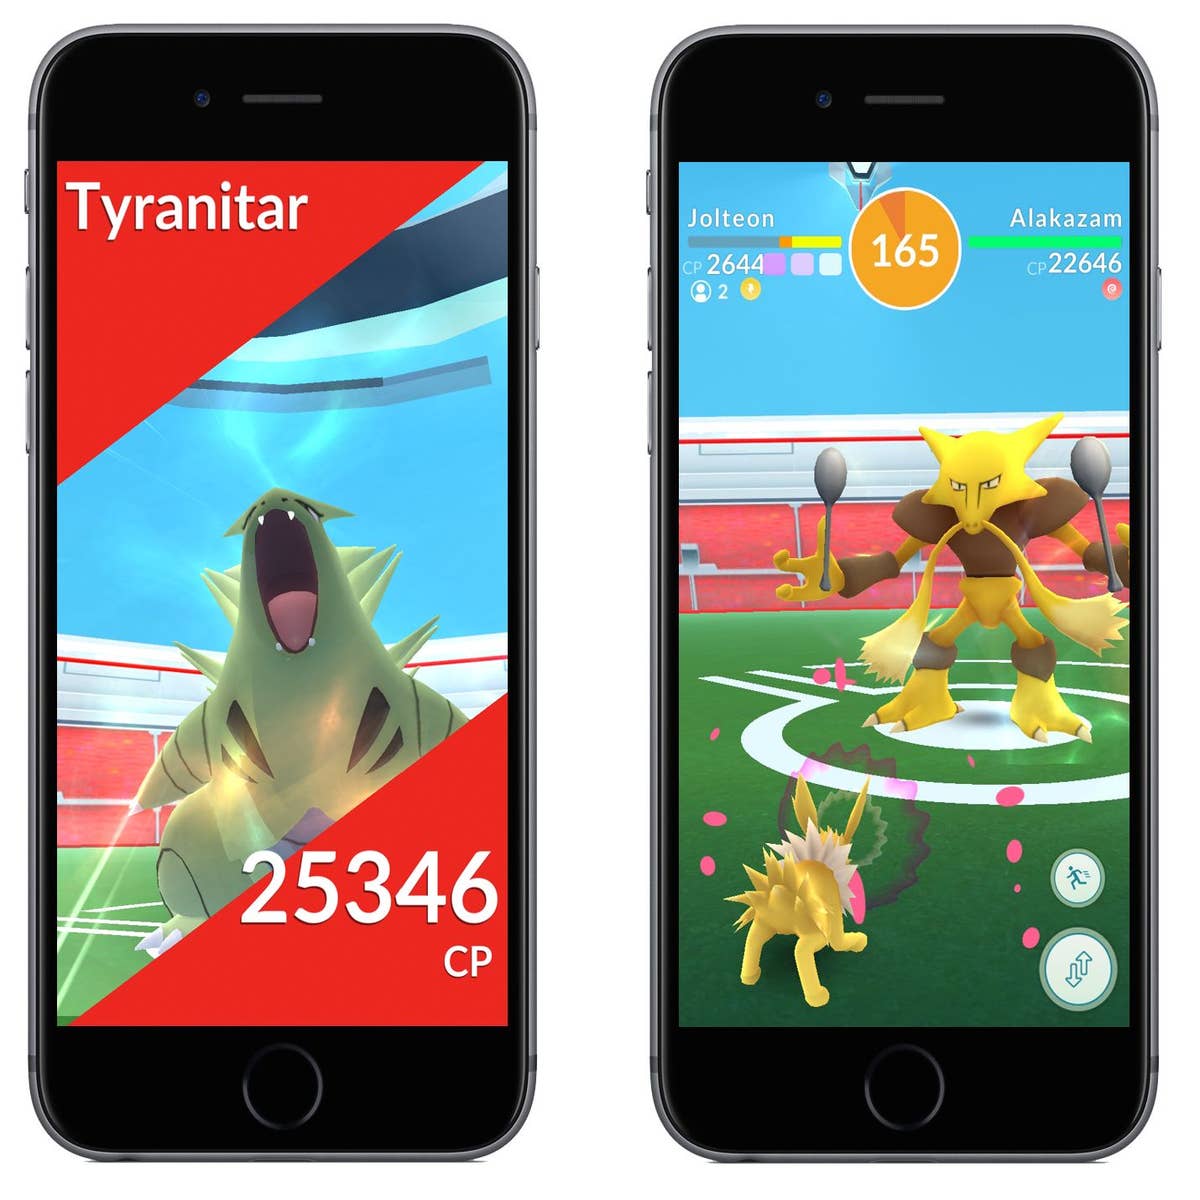 Raid Passes Will No Longer Be Consumed Before Battle In Pokémon GO